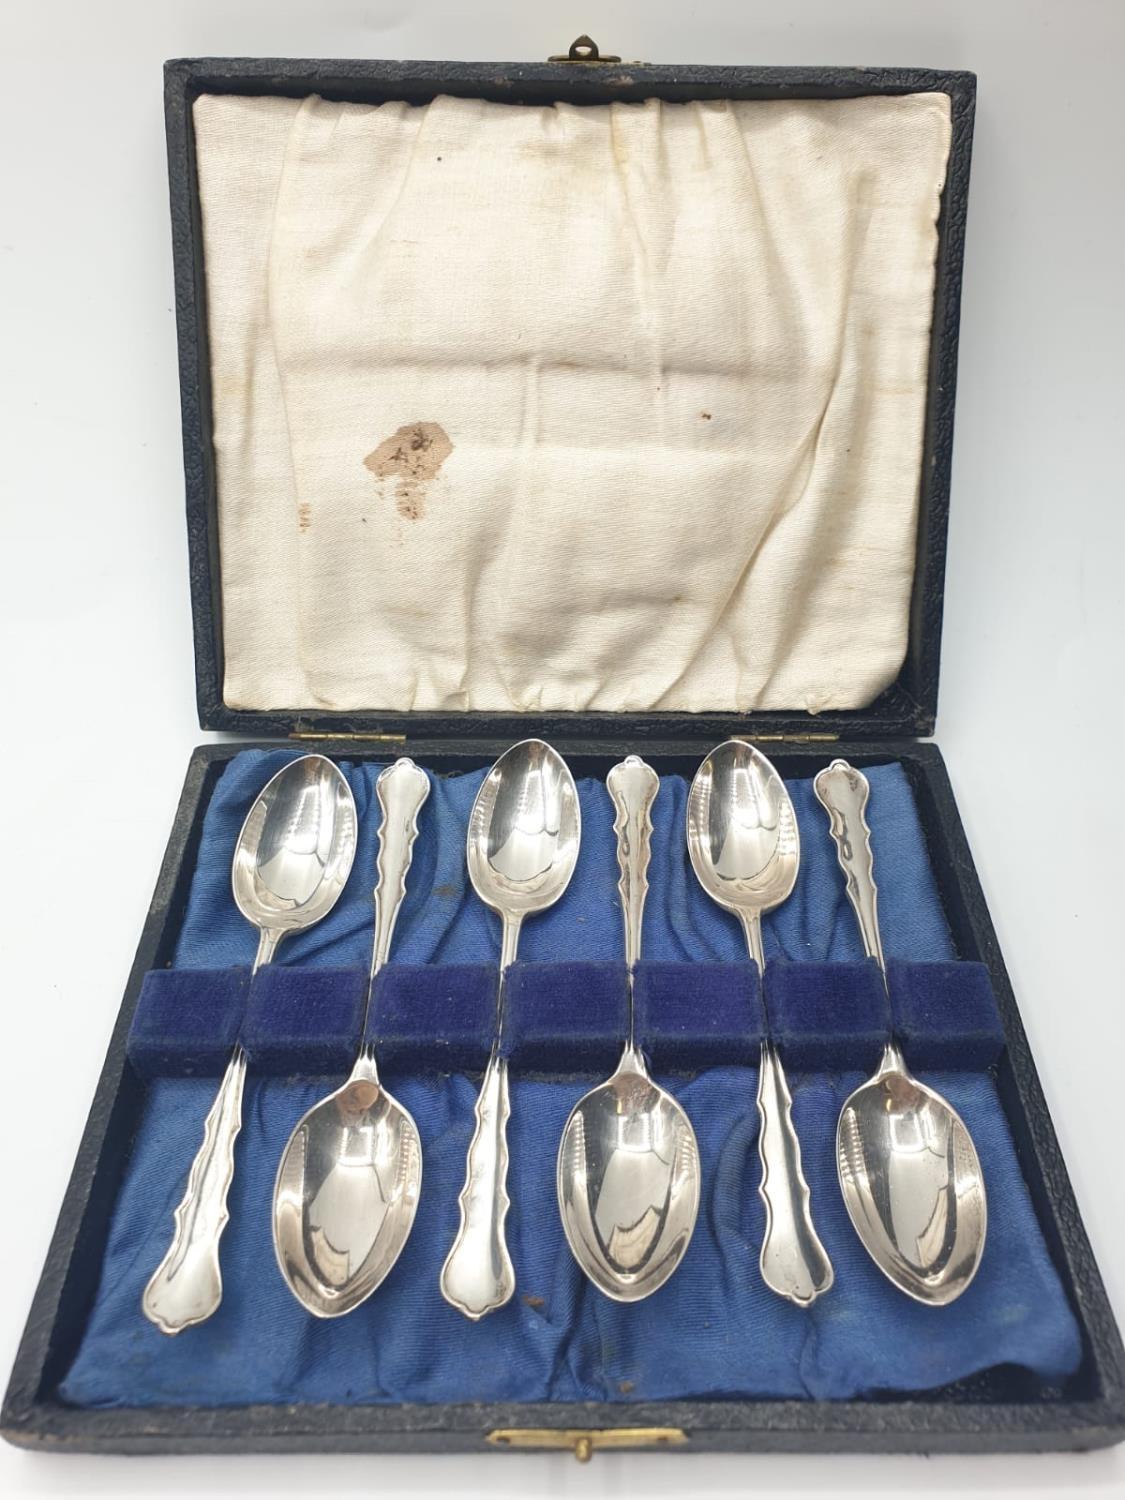 Antique set of 6 silver spoons. Each spoon hallmarked showing Josiah Williams London, 1915.